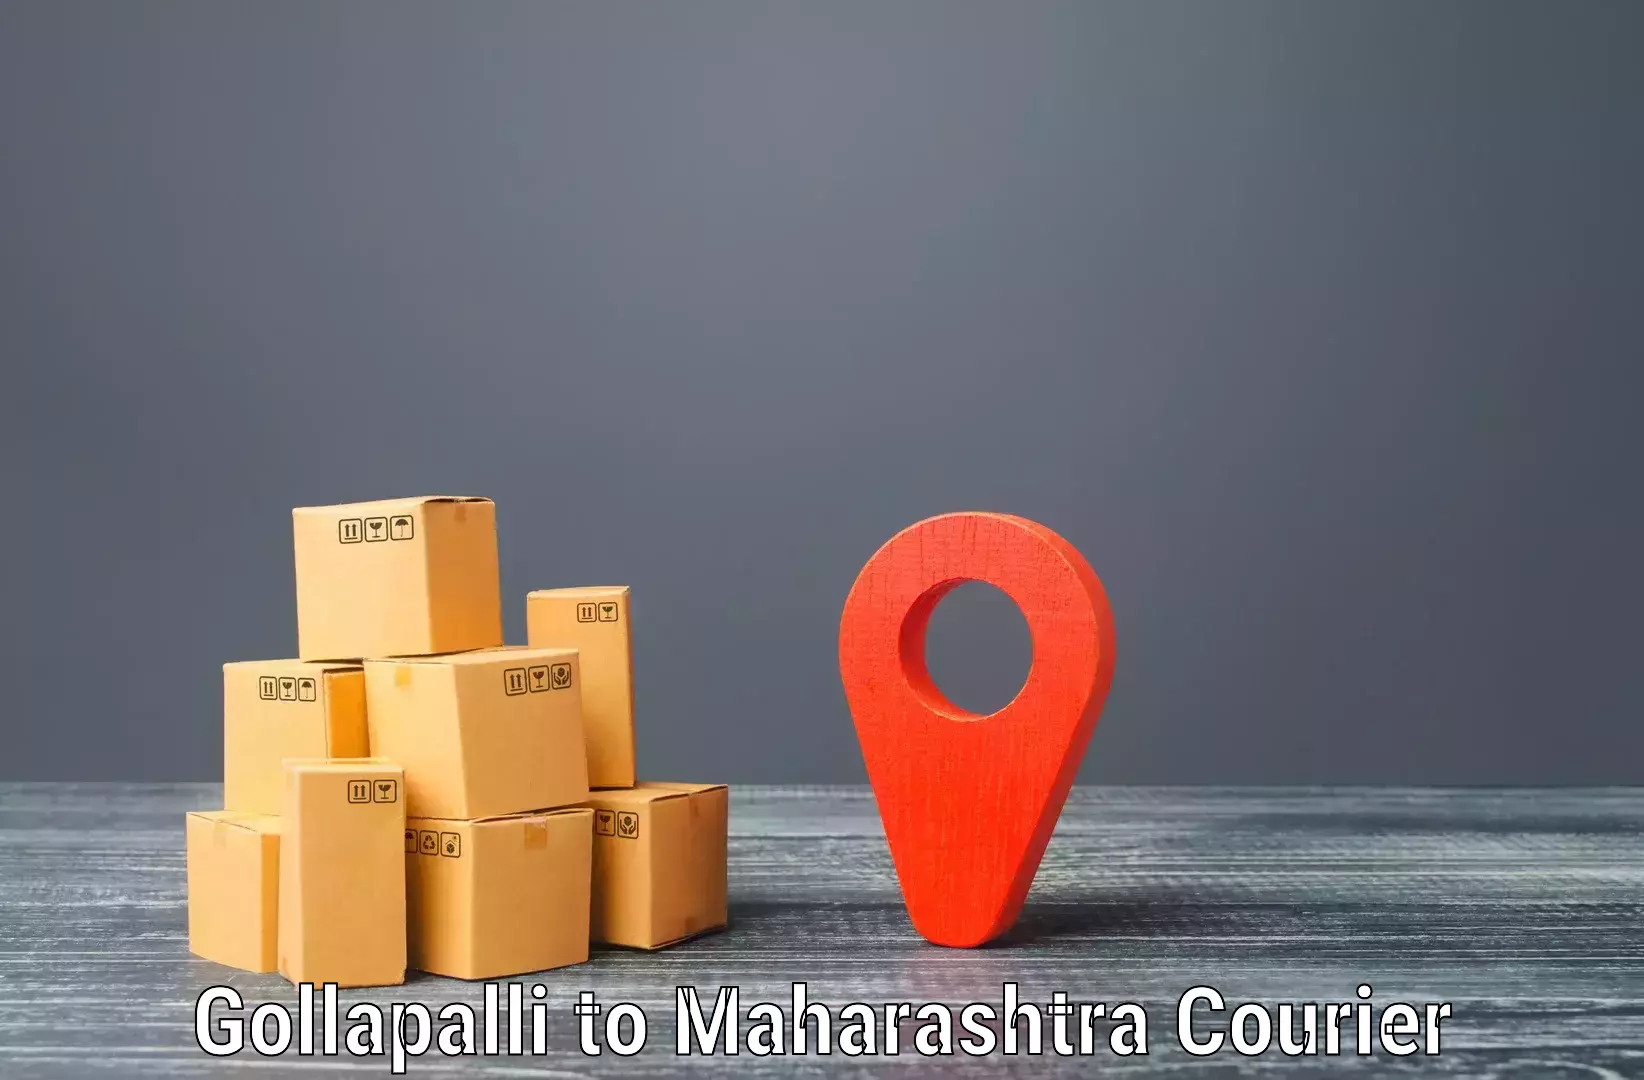 Comprehensive shipping network Gollapalli to Latur